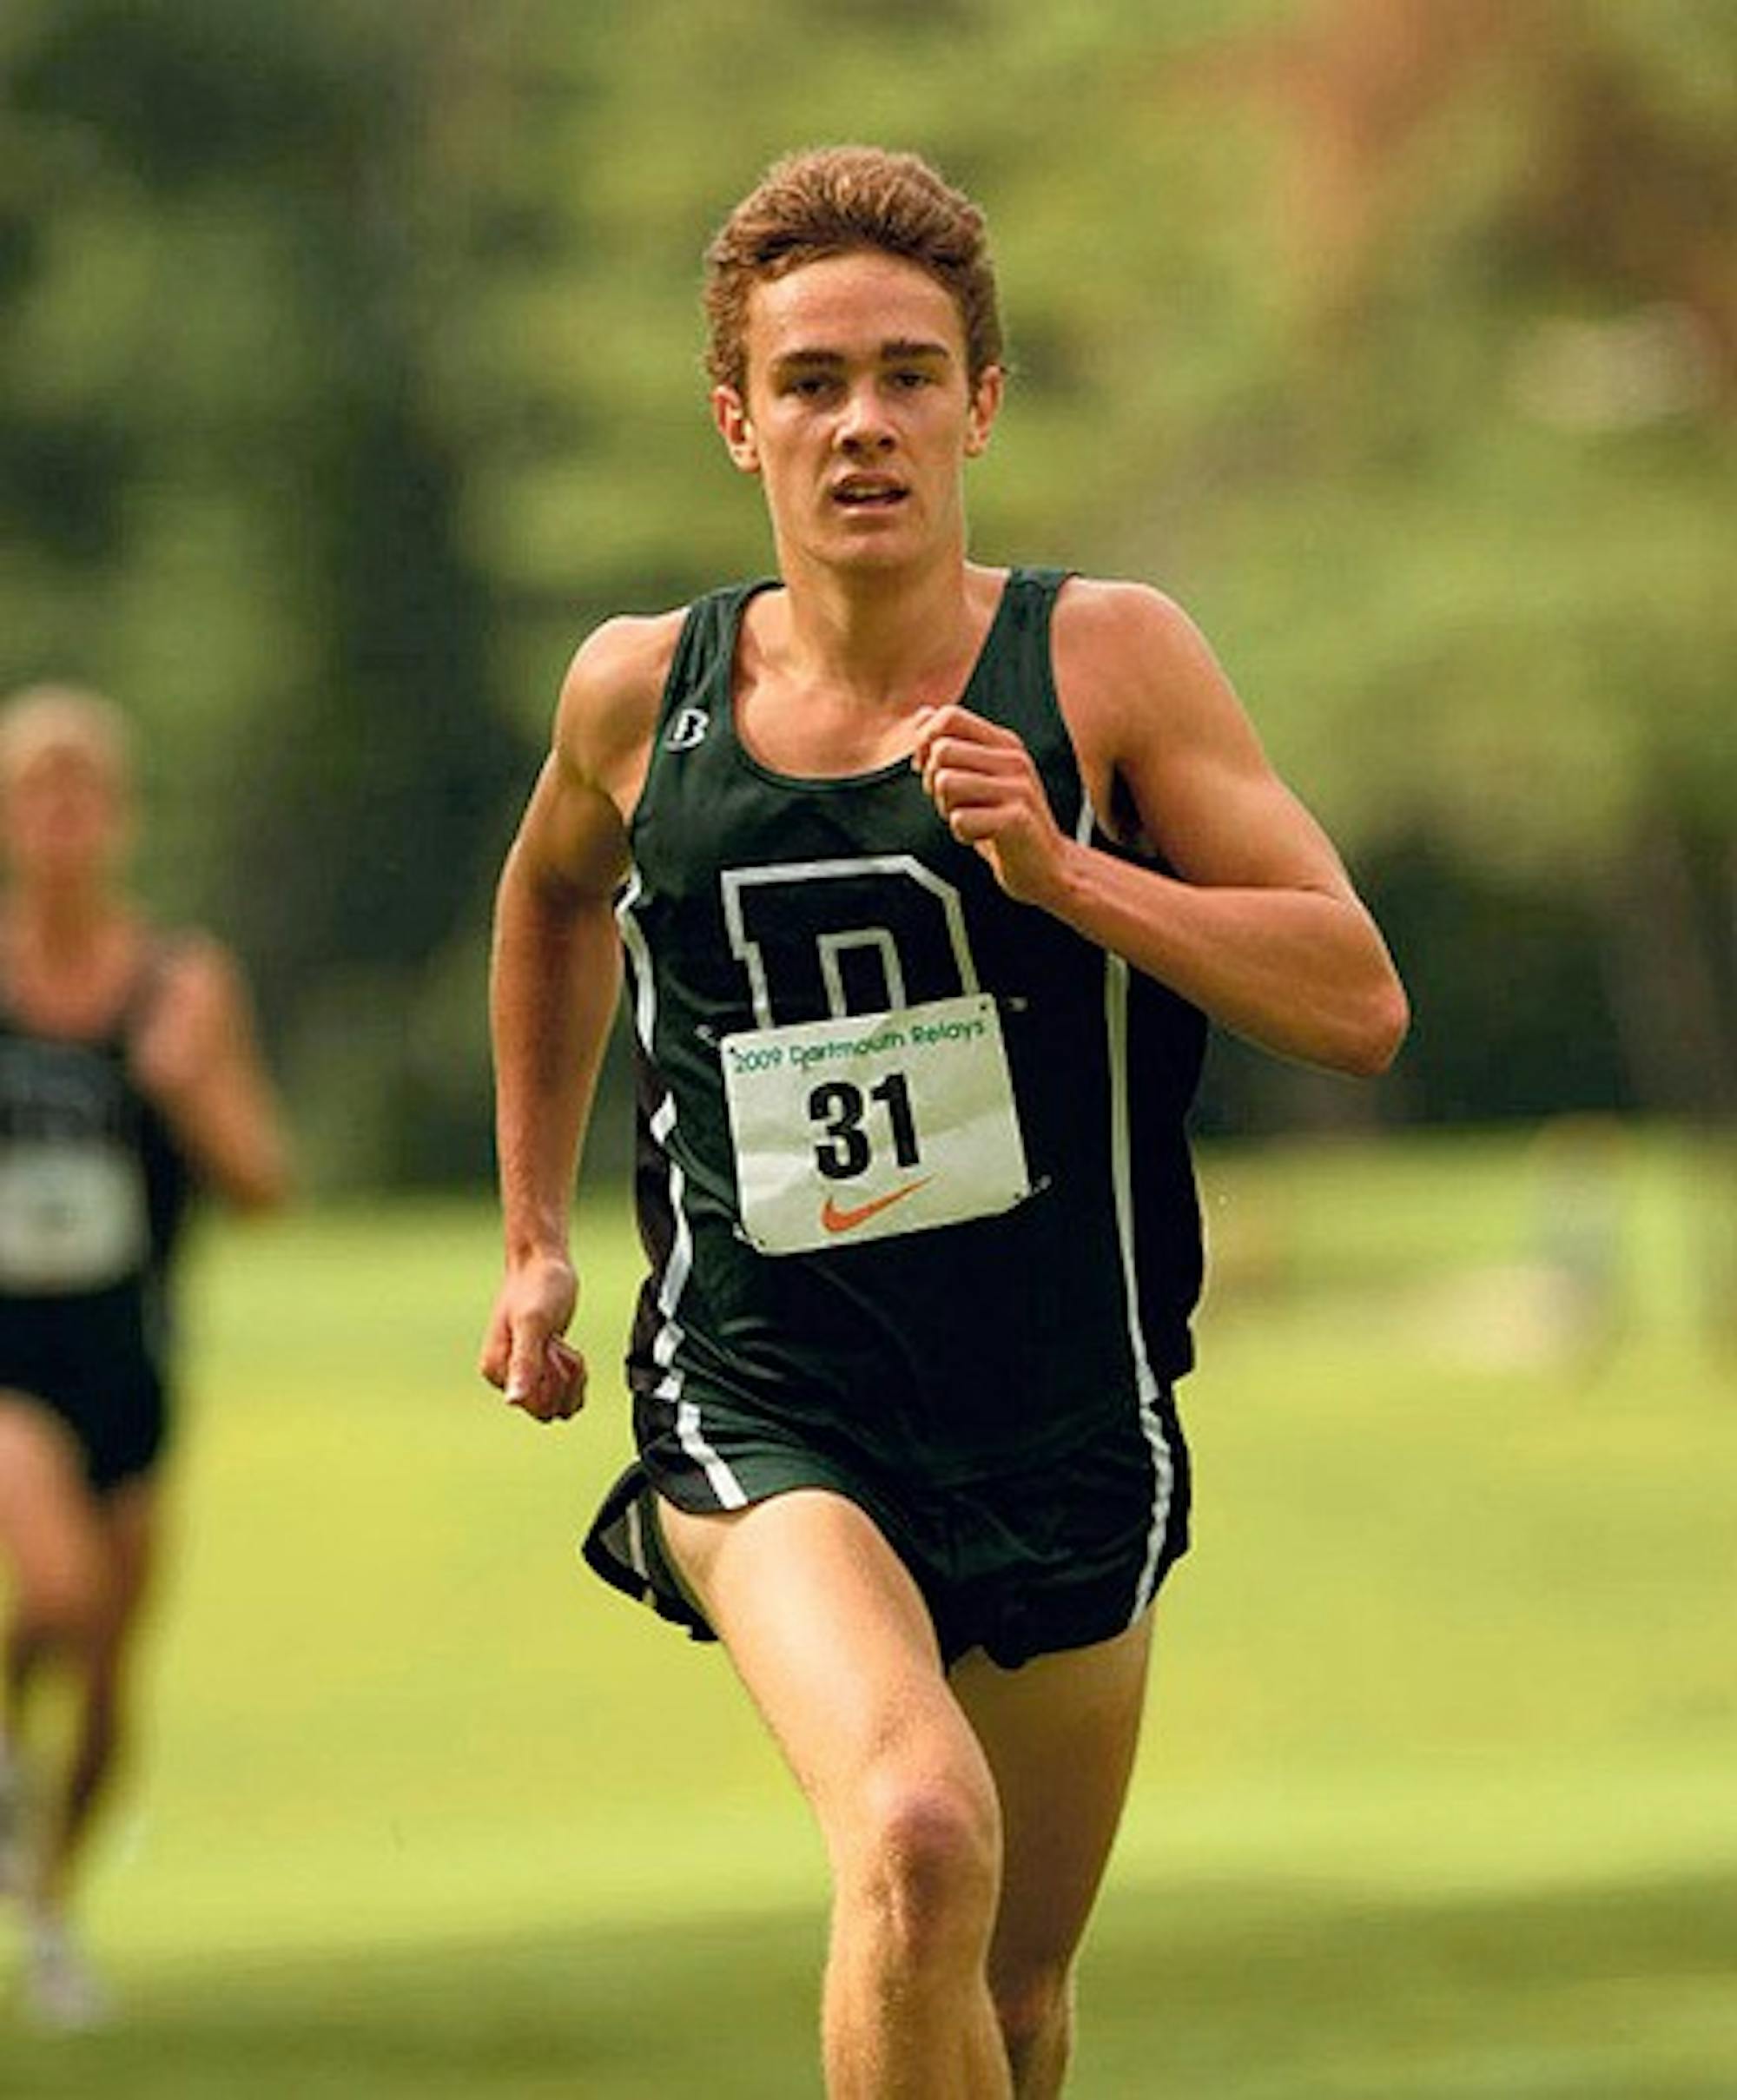 Chris Zablocki '10 will be one of Dartmouth's top runners at the Ivy League's Heptagonal Championships in New York, N.Y., this weekend.